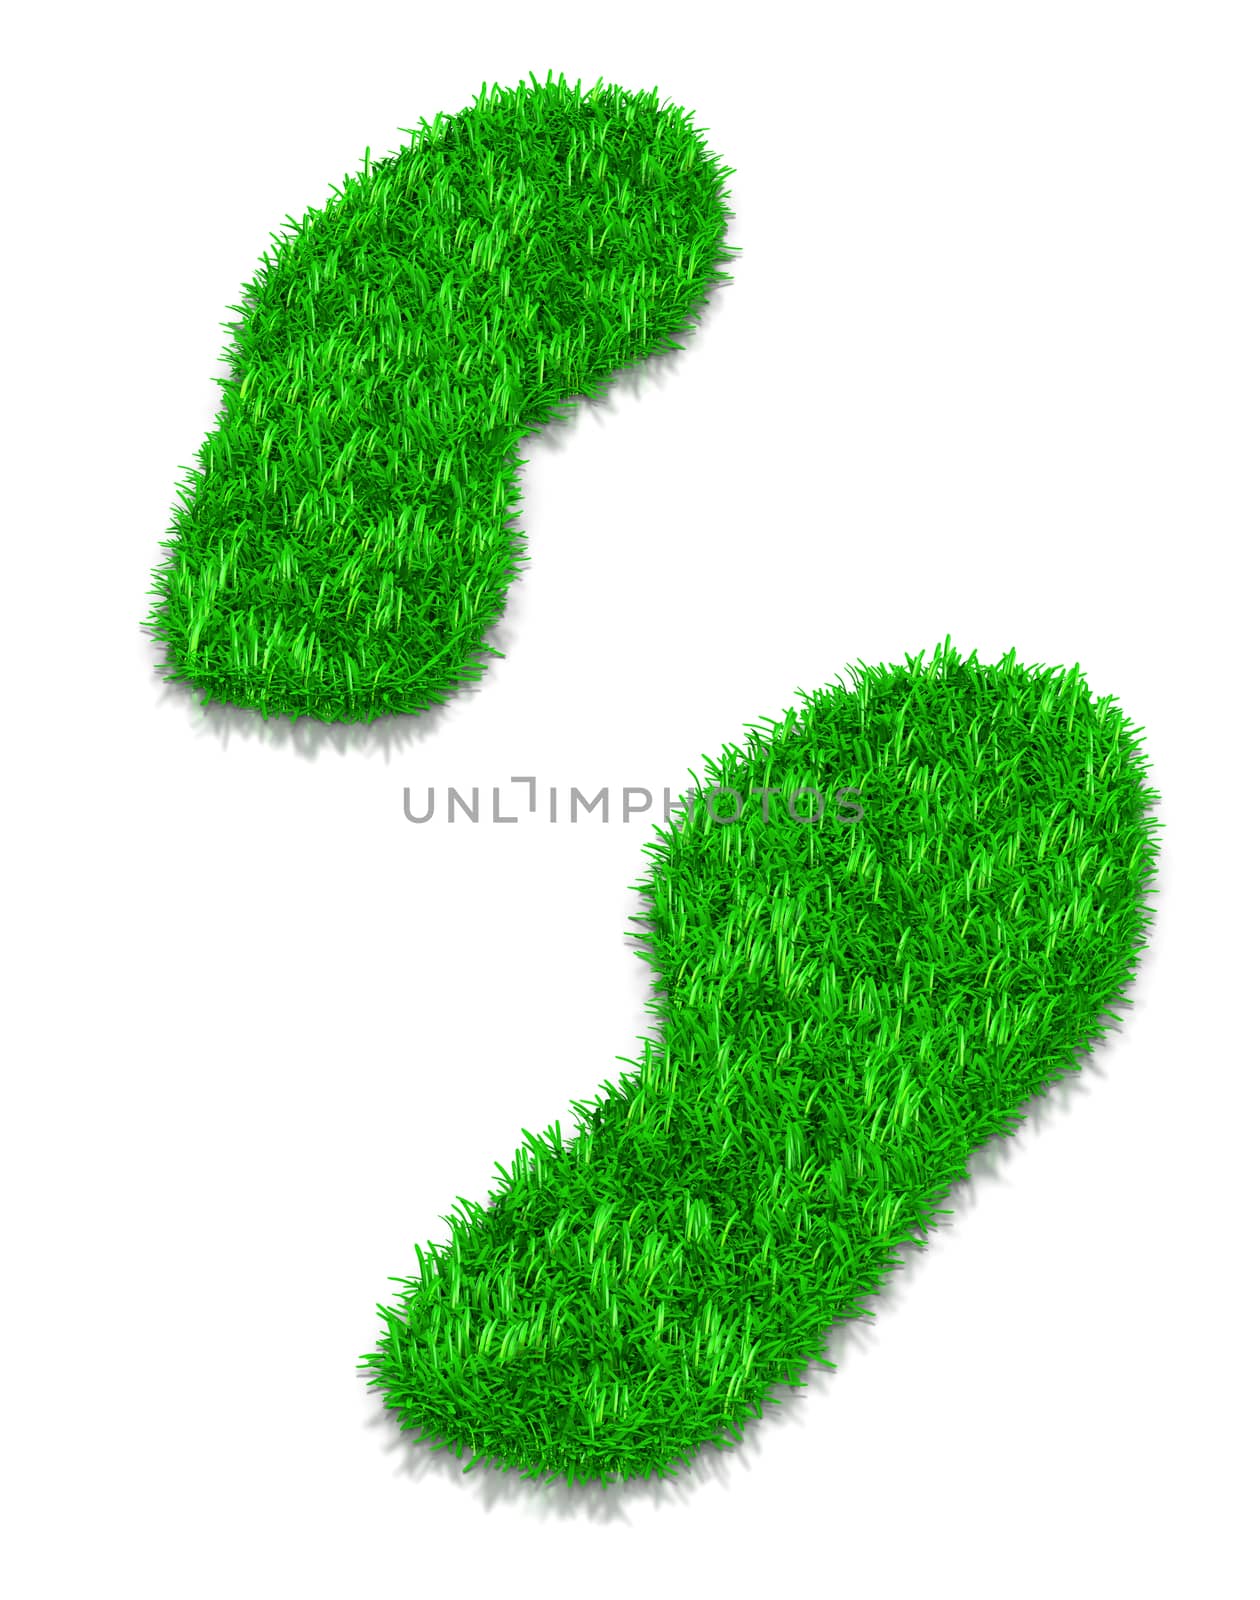 Green Grass Footsteps by make